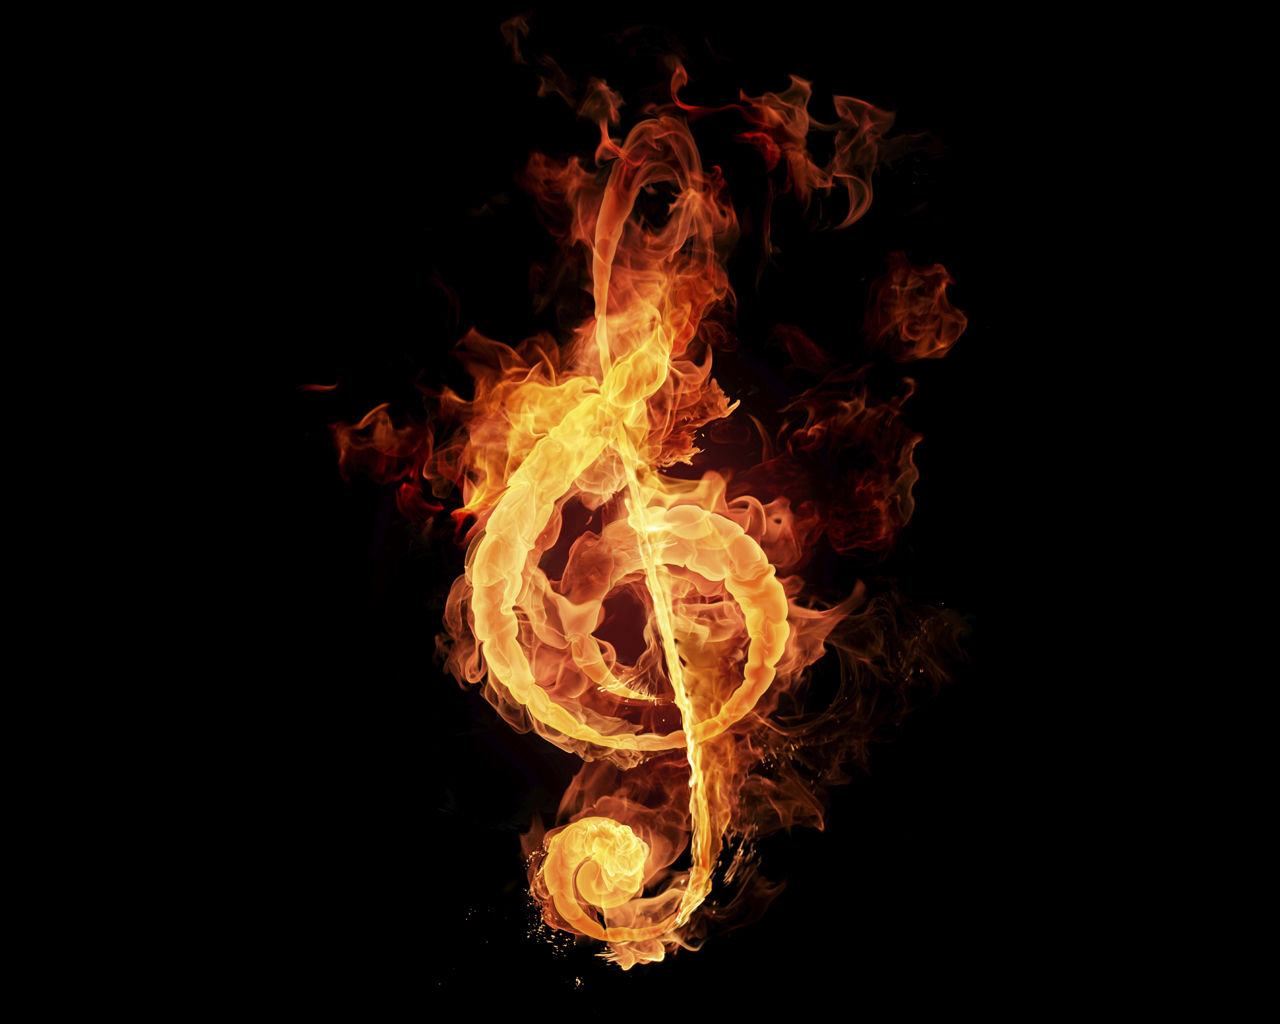 music, fire, black High Definition image